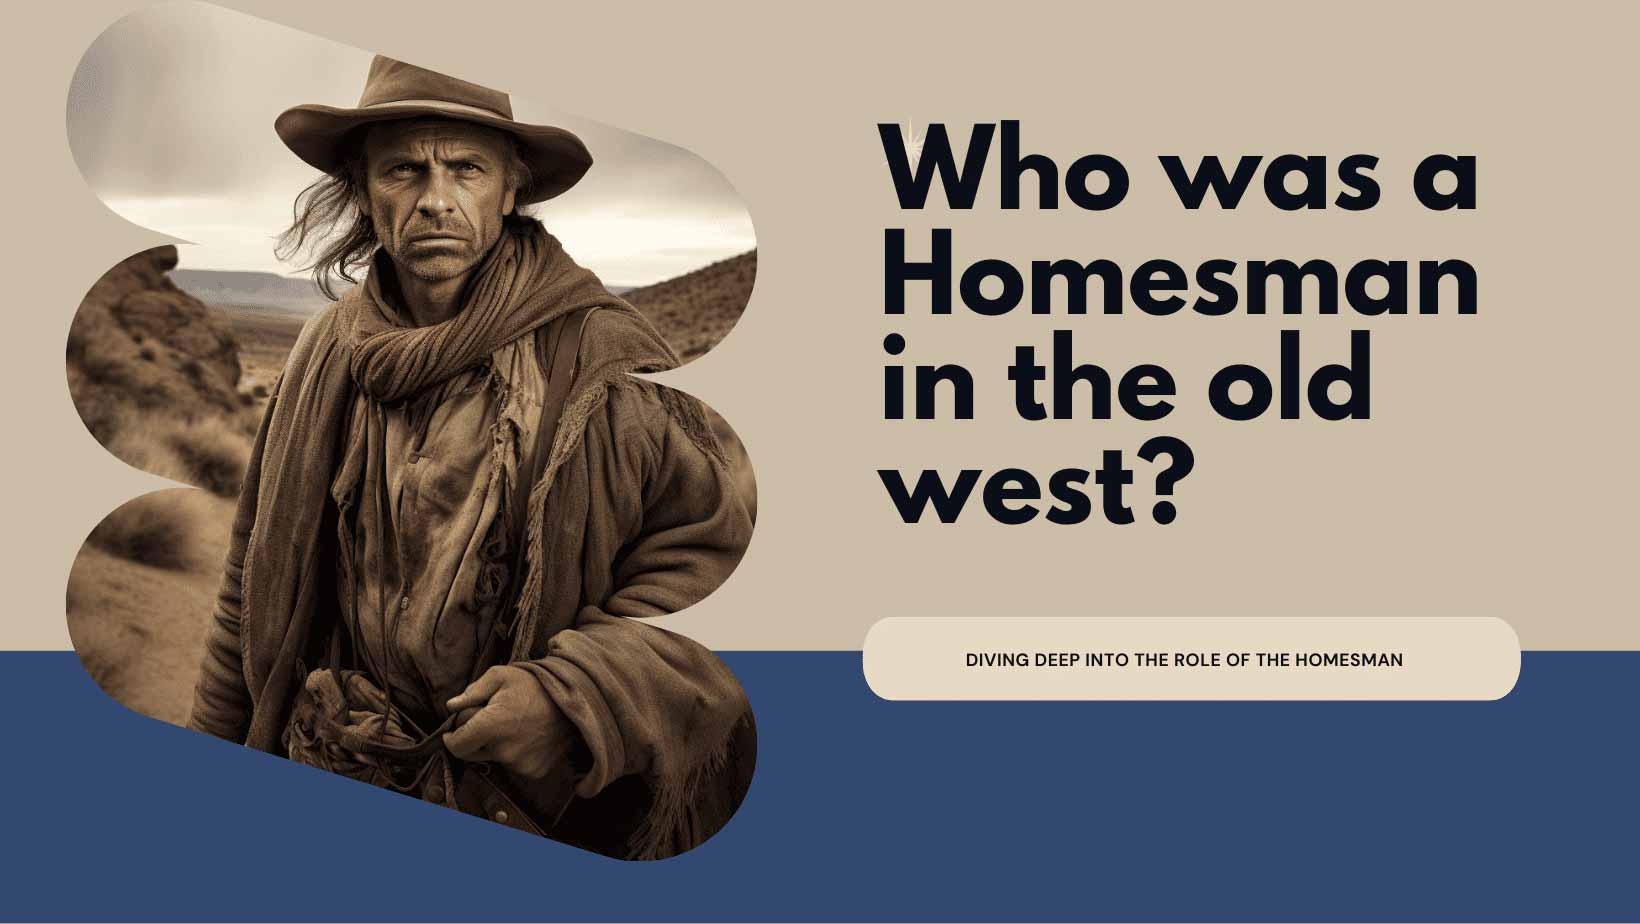 who was a homesman in the old west